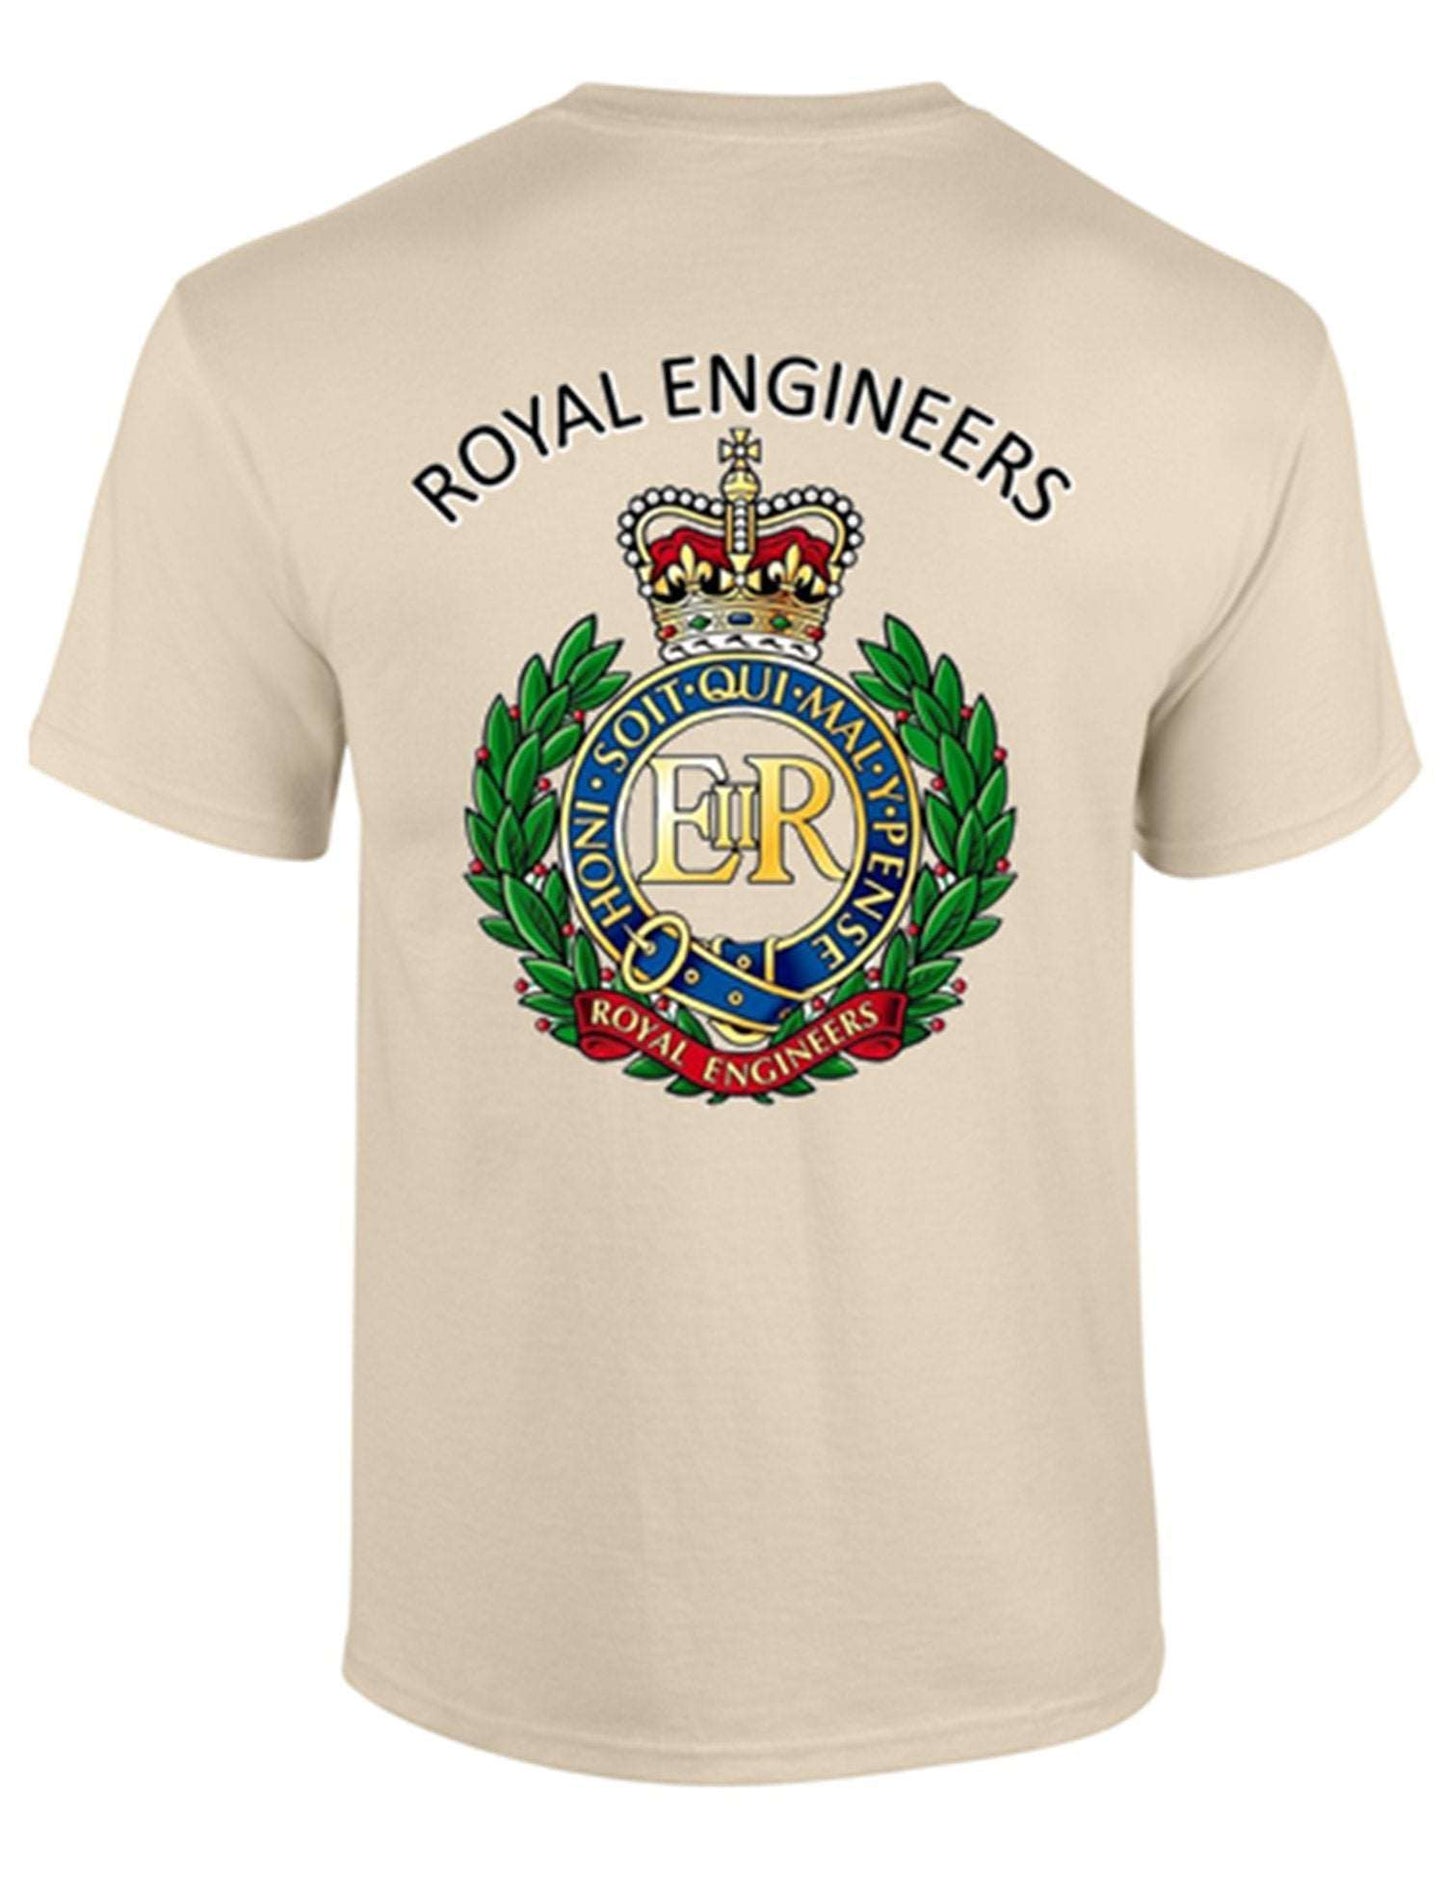 Bear Essentials Clothing. Royal Engineers T-Shirt Double Print in Colour - Army 1157 kit Army 1157 Kit